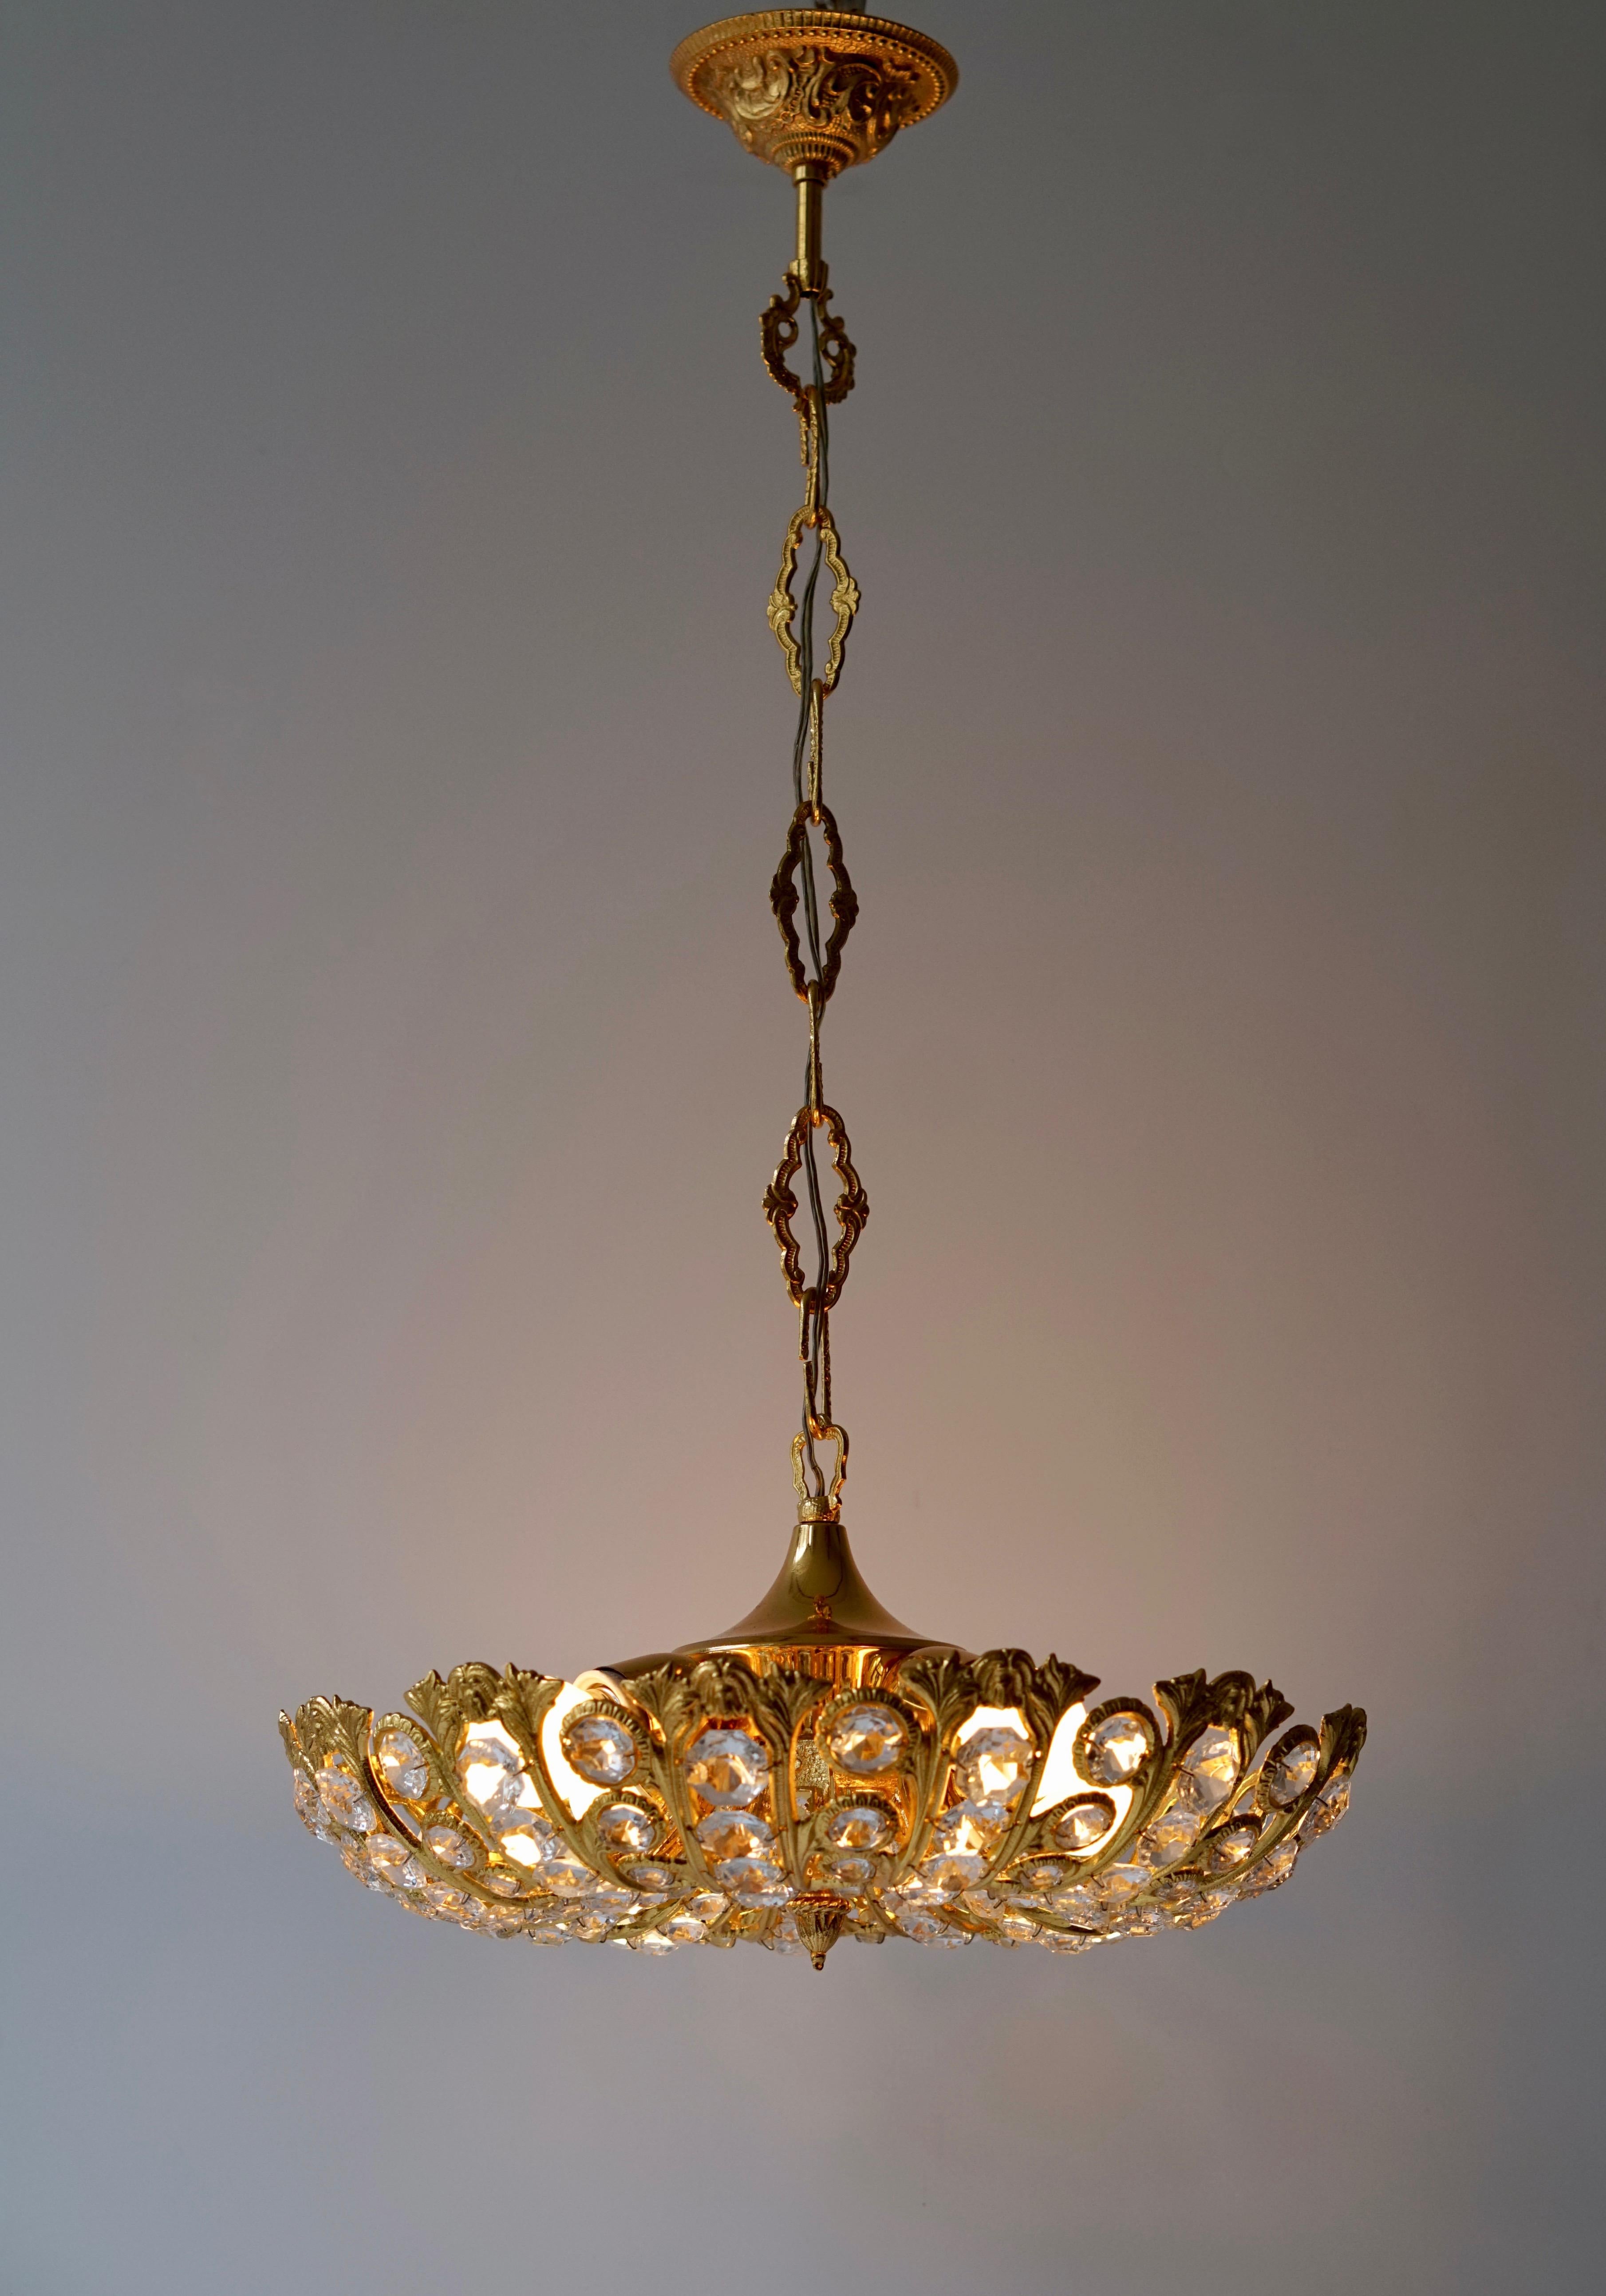 Hollywood Regency Crystal and Gilded Chandelier by Palwa For Sale 2